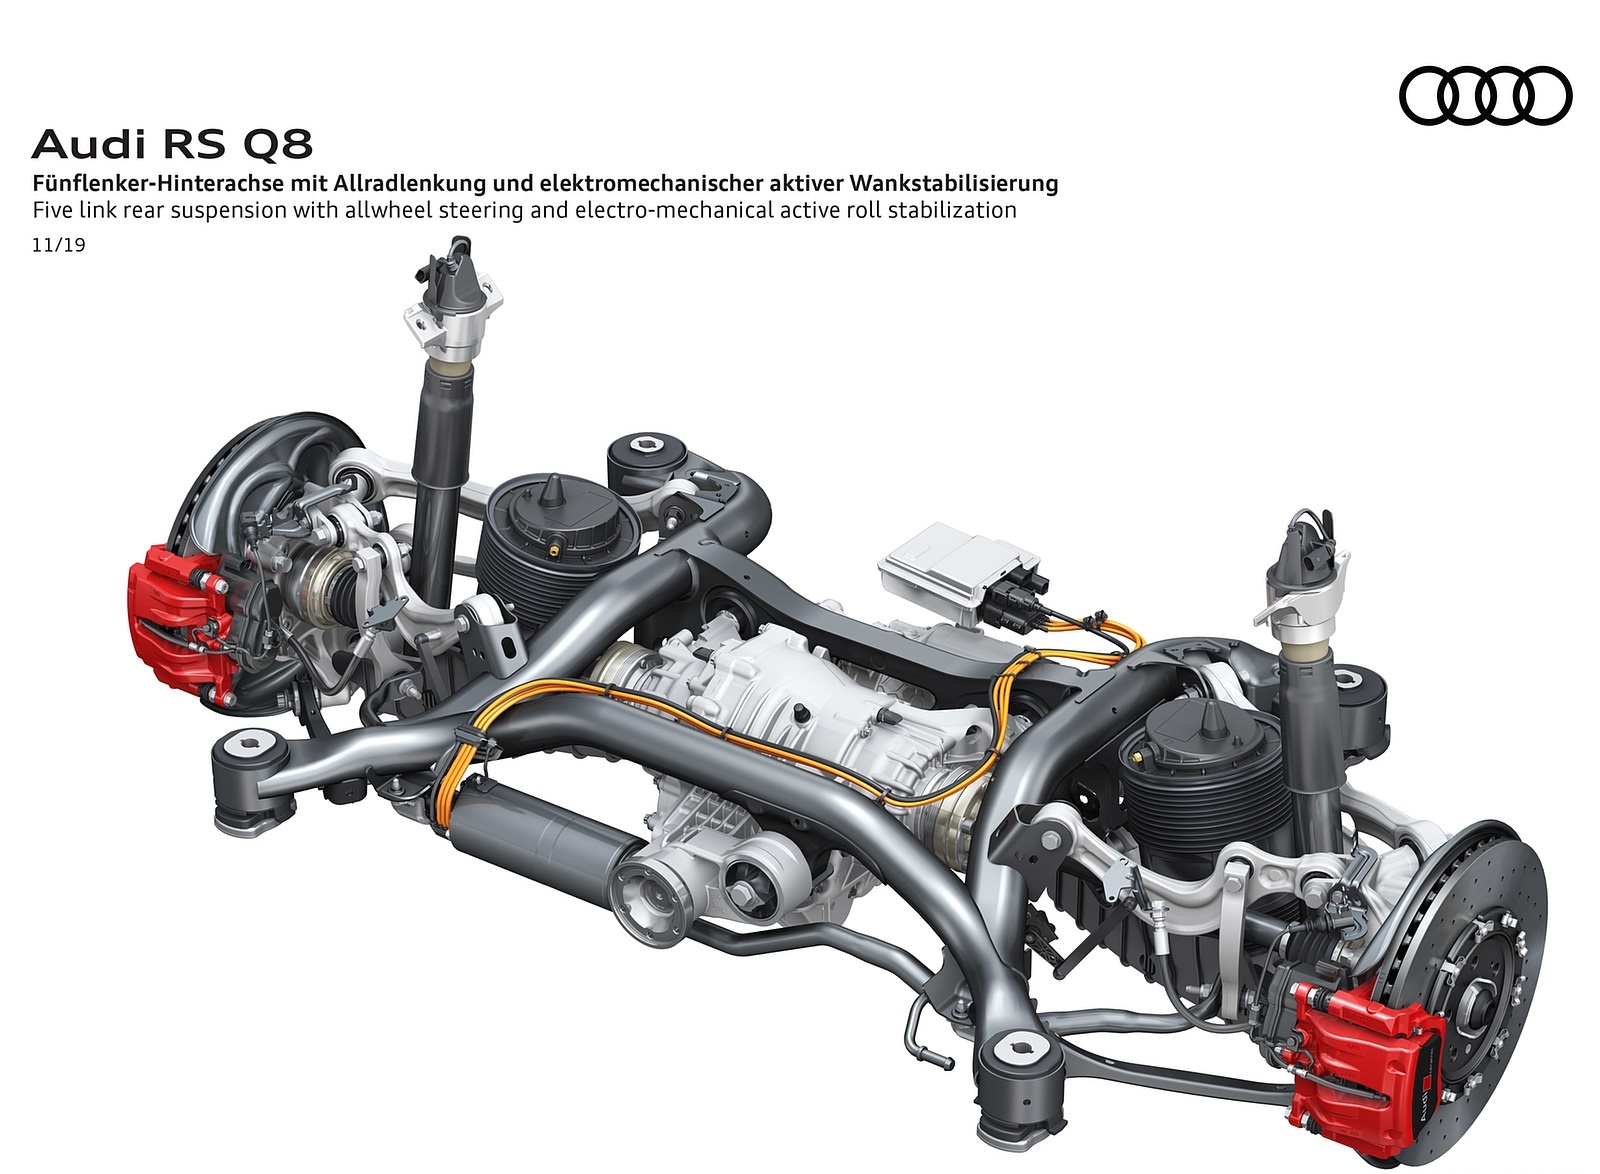 2020 Audi RS Q8 Five link rear suspension with allwheel steering and electro-mechanical active roll stabilization Wallpapers #170 of 196